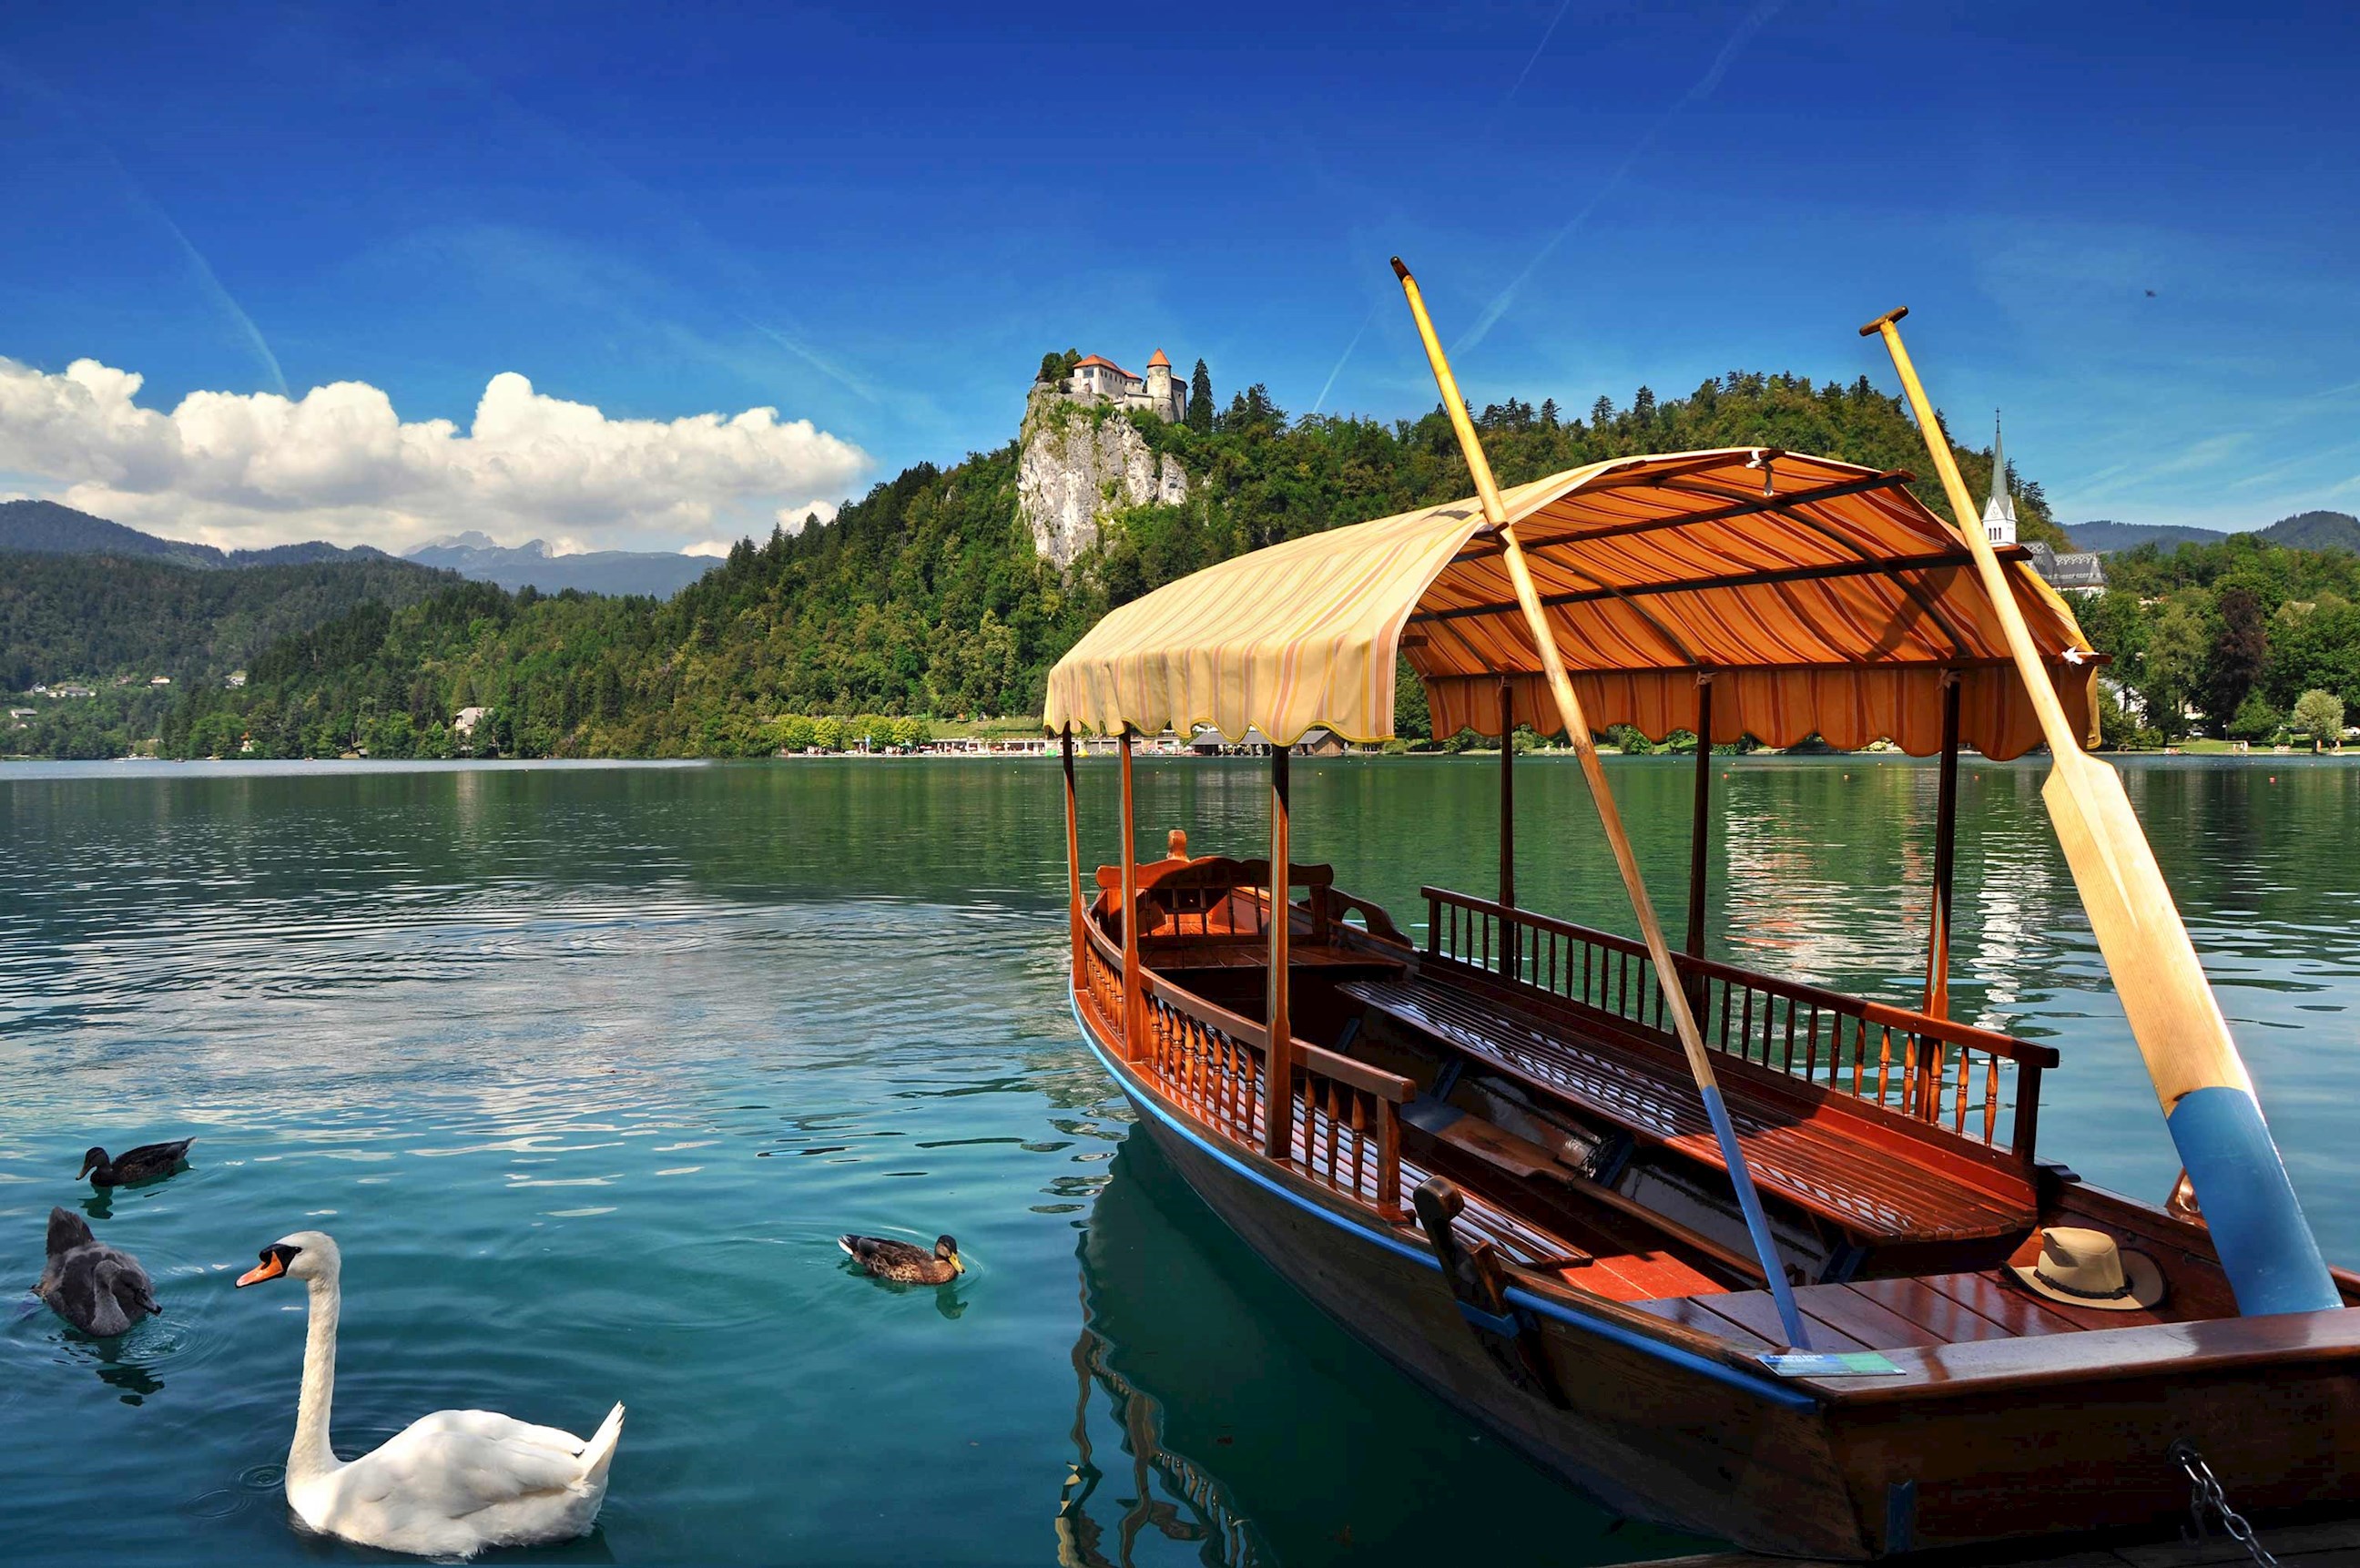 Jewels of Slovenian countryside in Bled, Slovenia